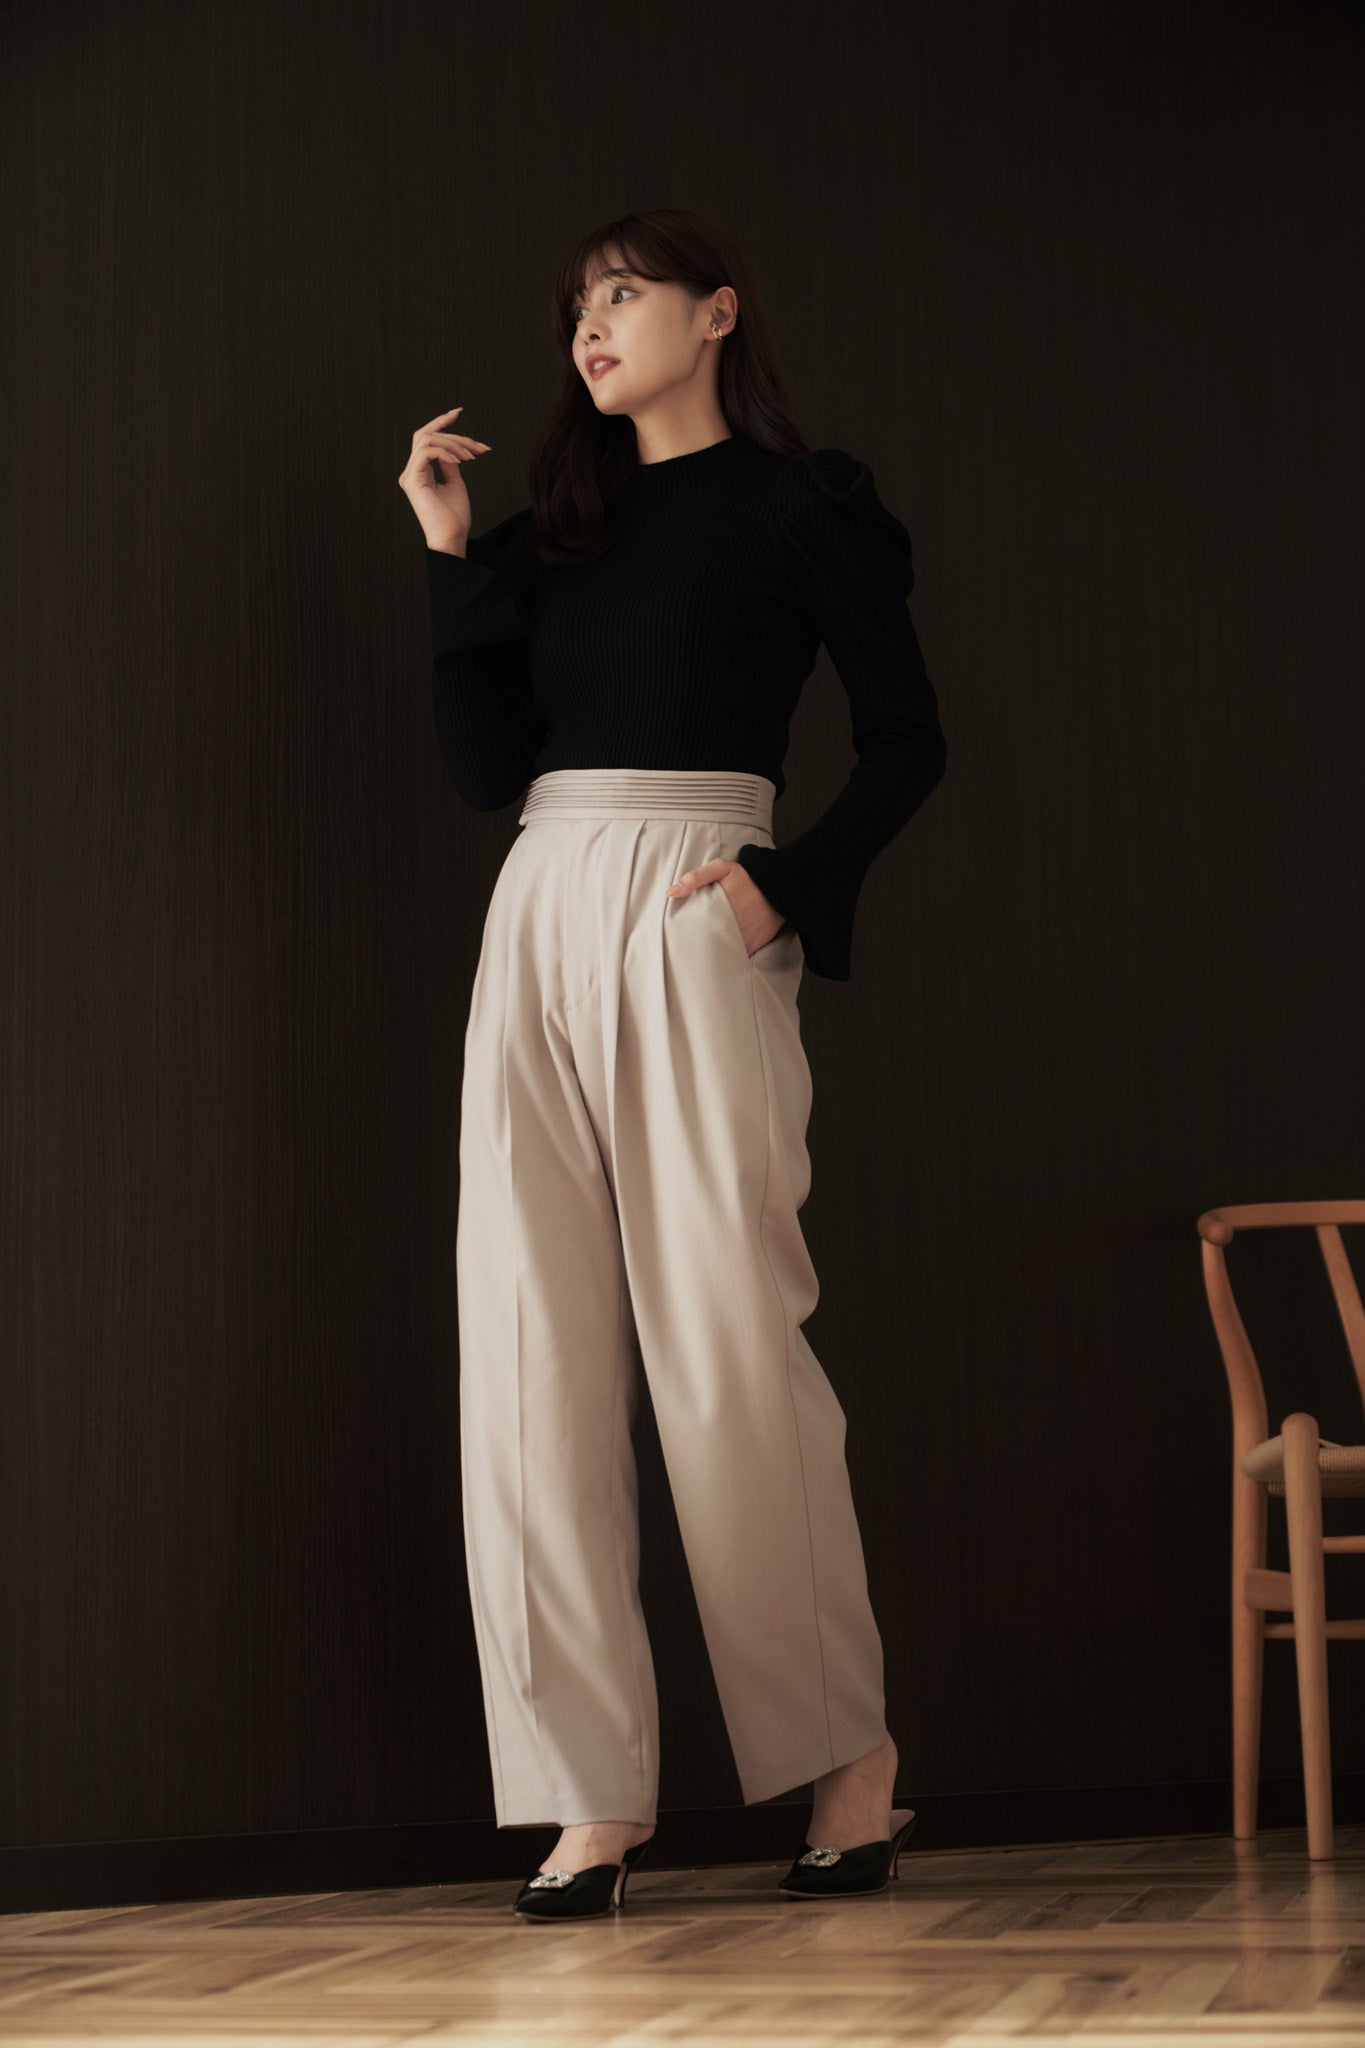 Marilyn Straight Pants Sculpt-Her™ Collection - Charcoal Heathered